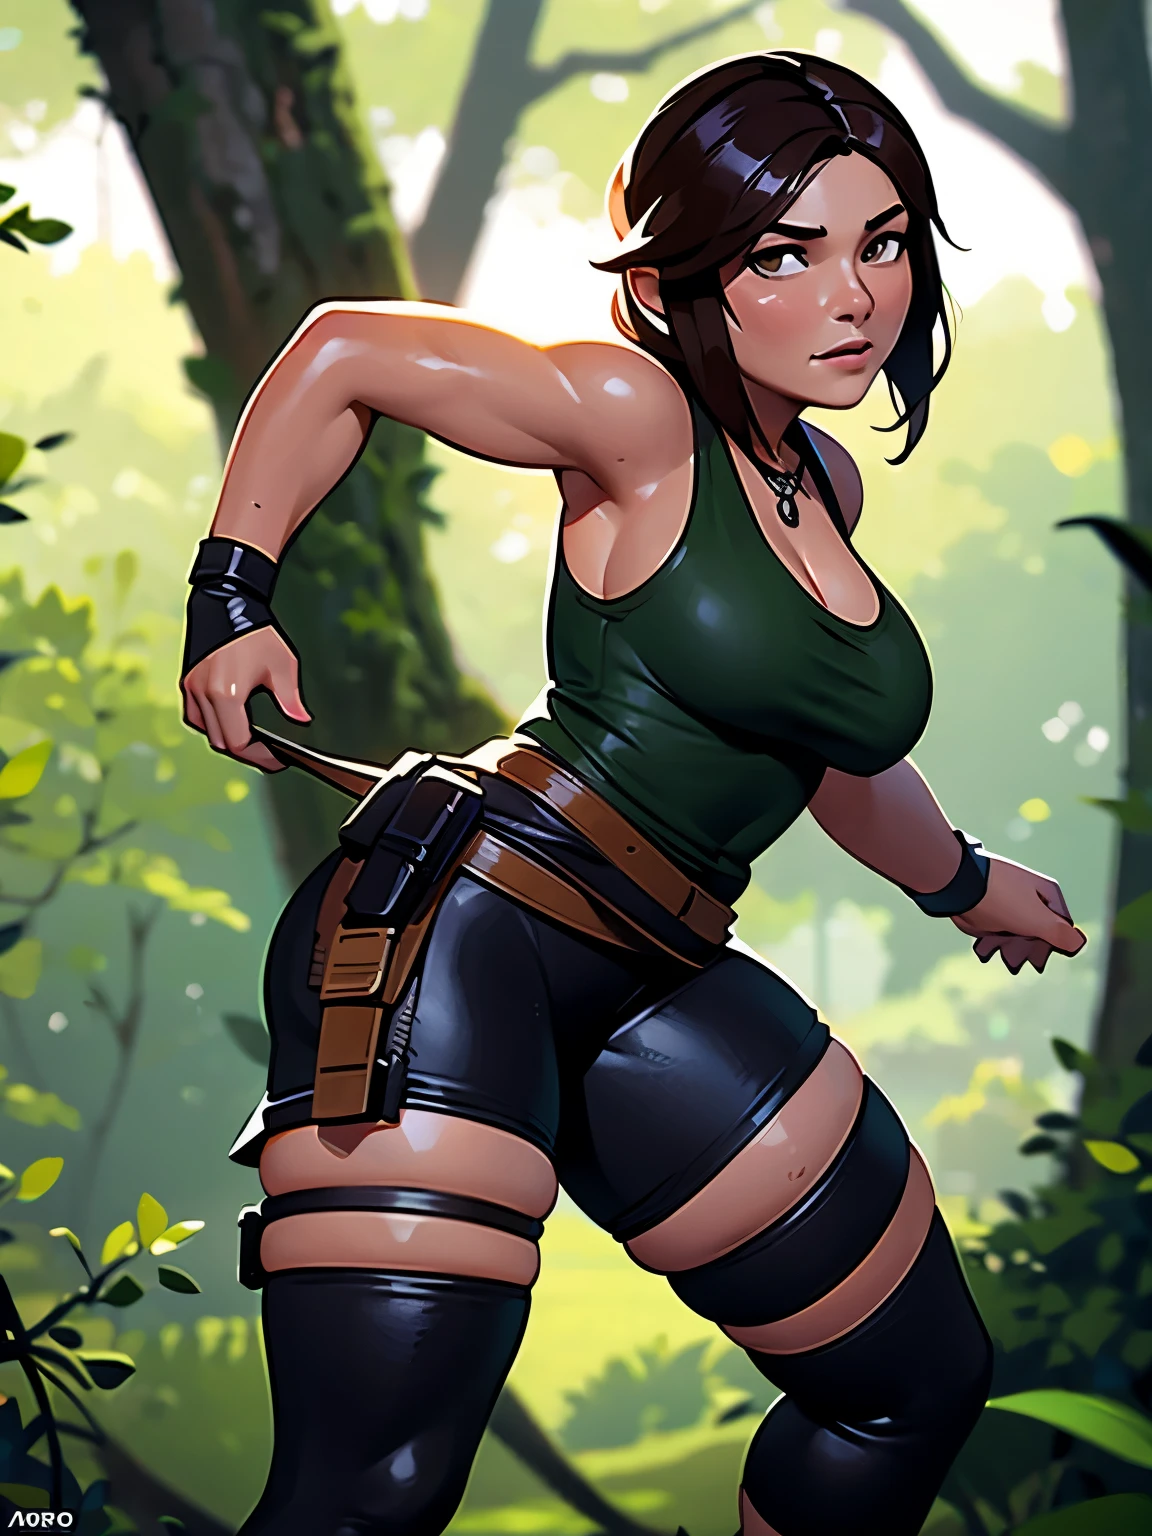 Nsfw, Lara Croft, rise of The tomb raider, (master part, 4k resolution, Ultra-realistic, highy detailed), perfectbody, anatomical correct, detailed skin texture, face perfect, realistic hair, correct eyes, detailed back ground, greasy skin, expression of pleasure, standing